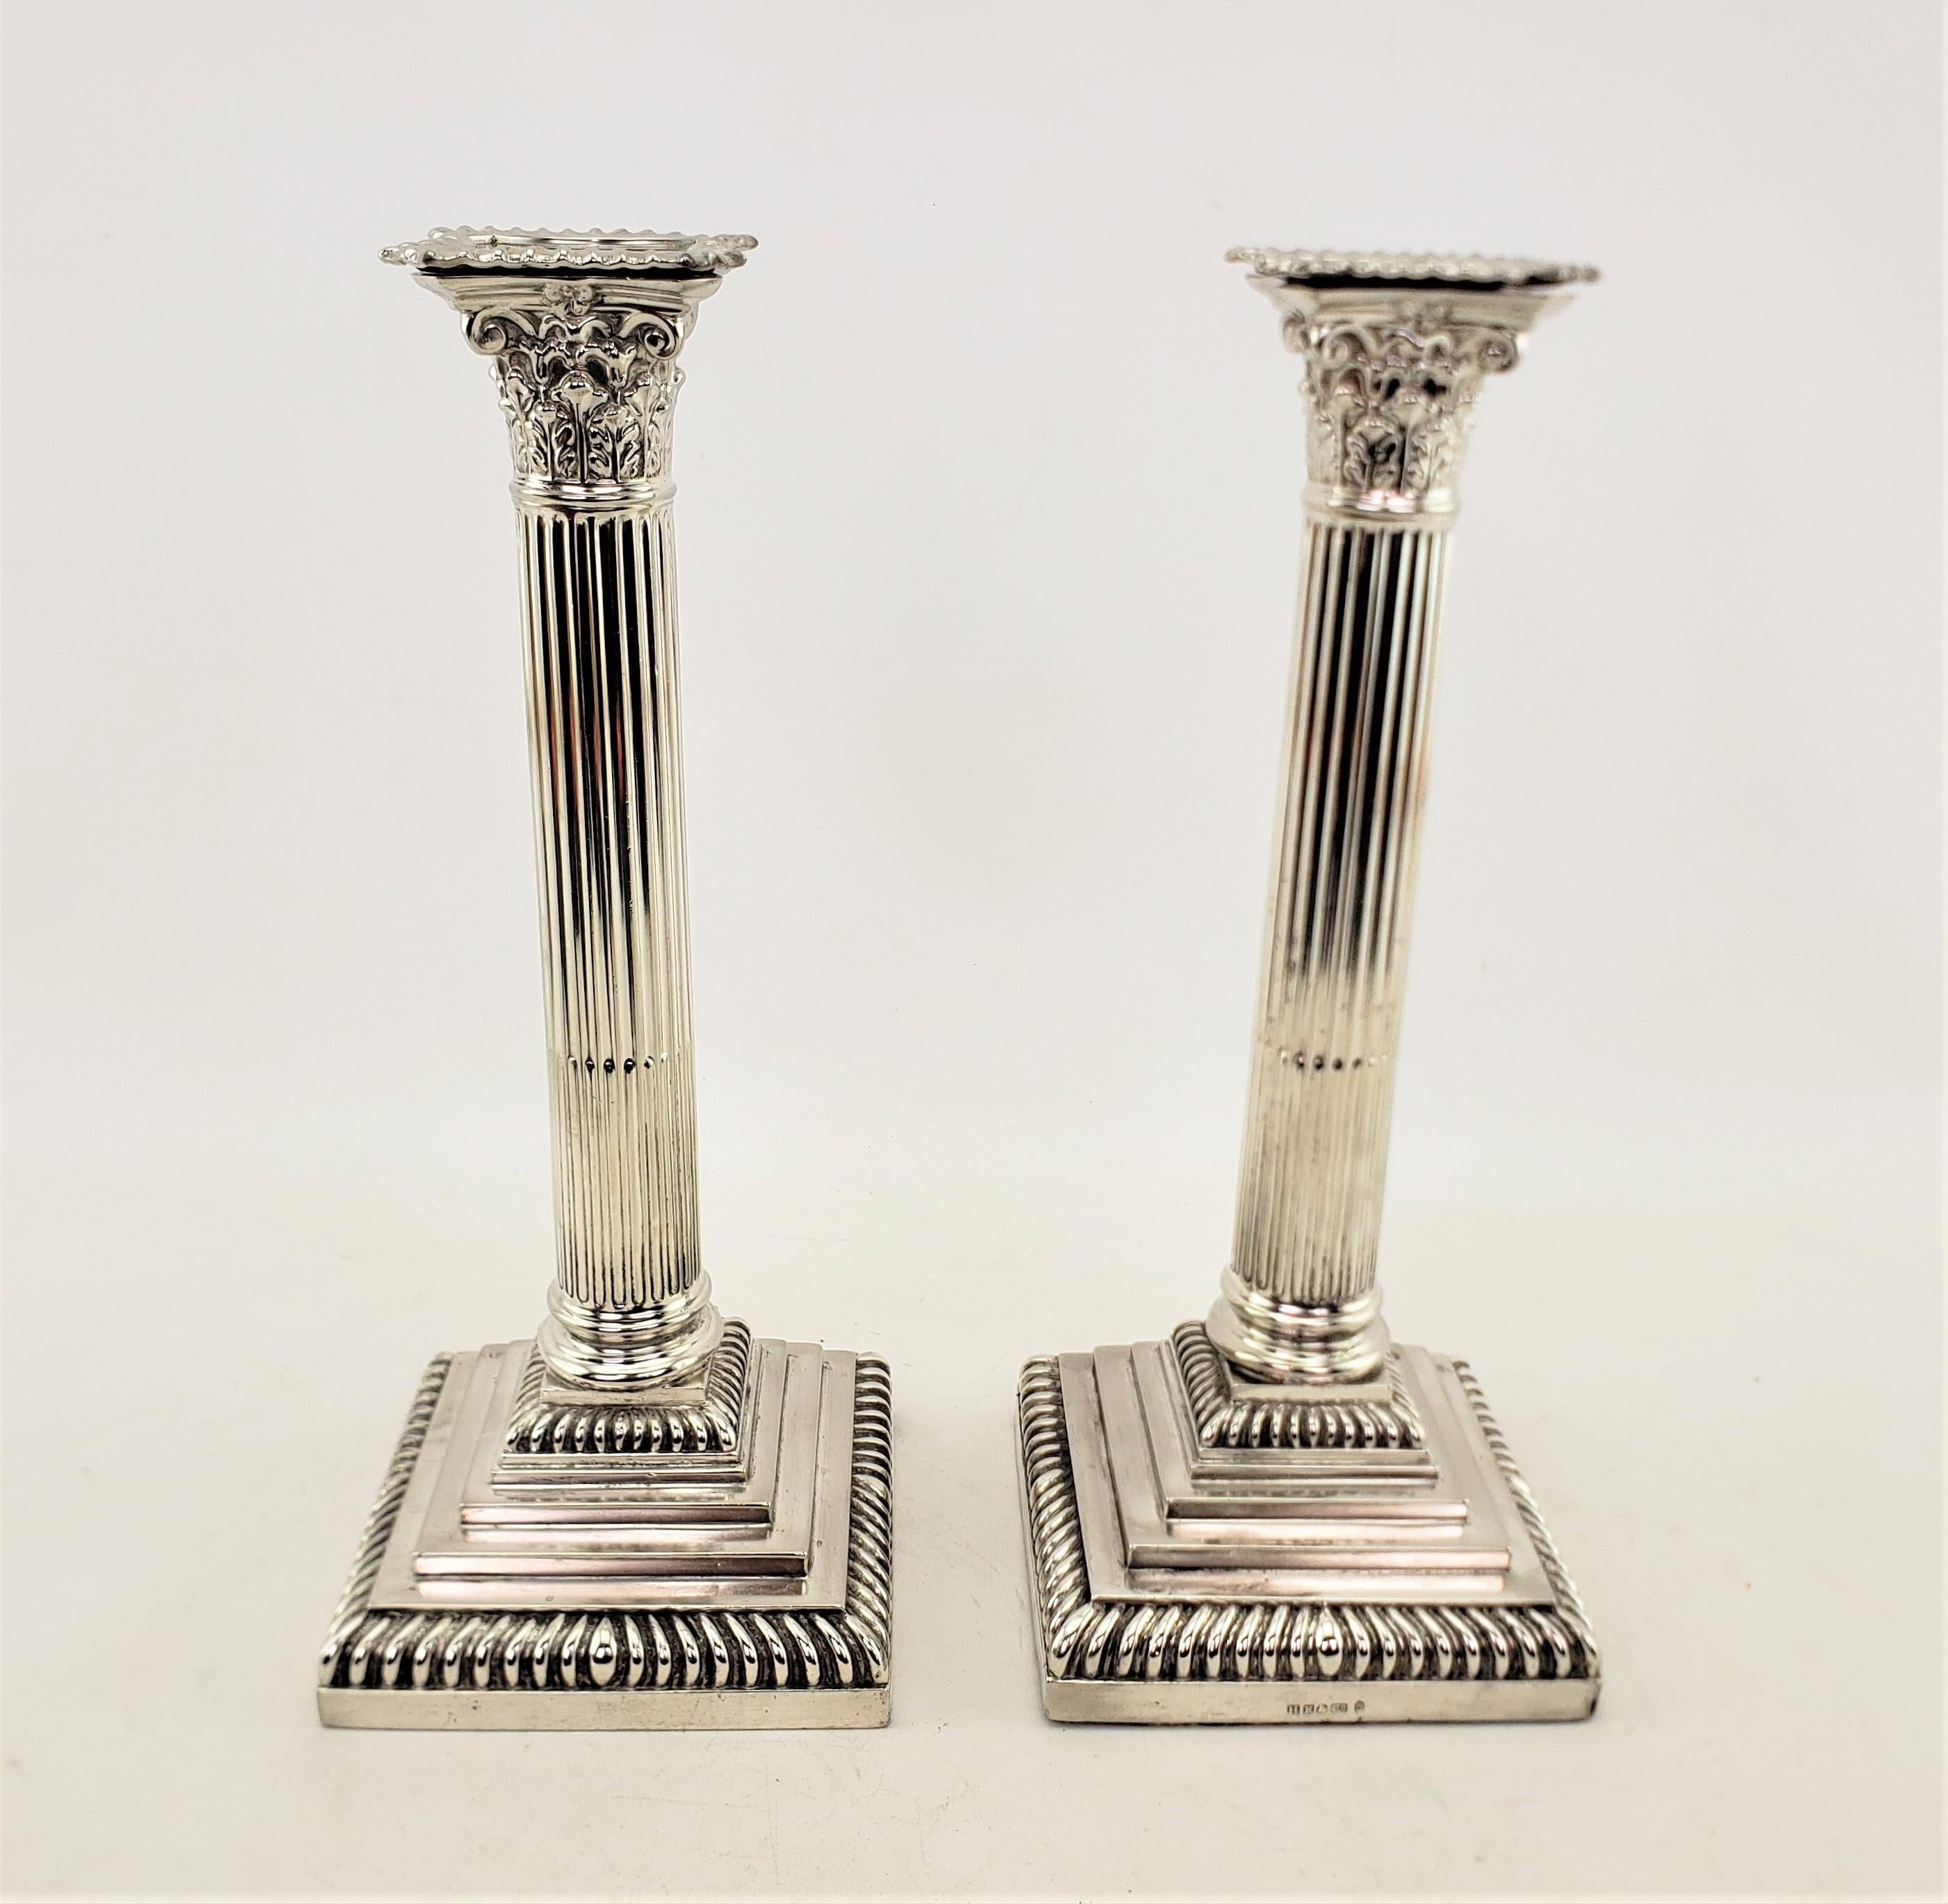 Pair of Antique English Silver Plated Candlesticks in a Corinthian Column Style For Sale 2